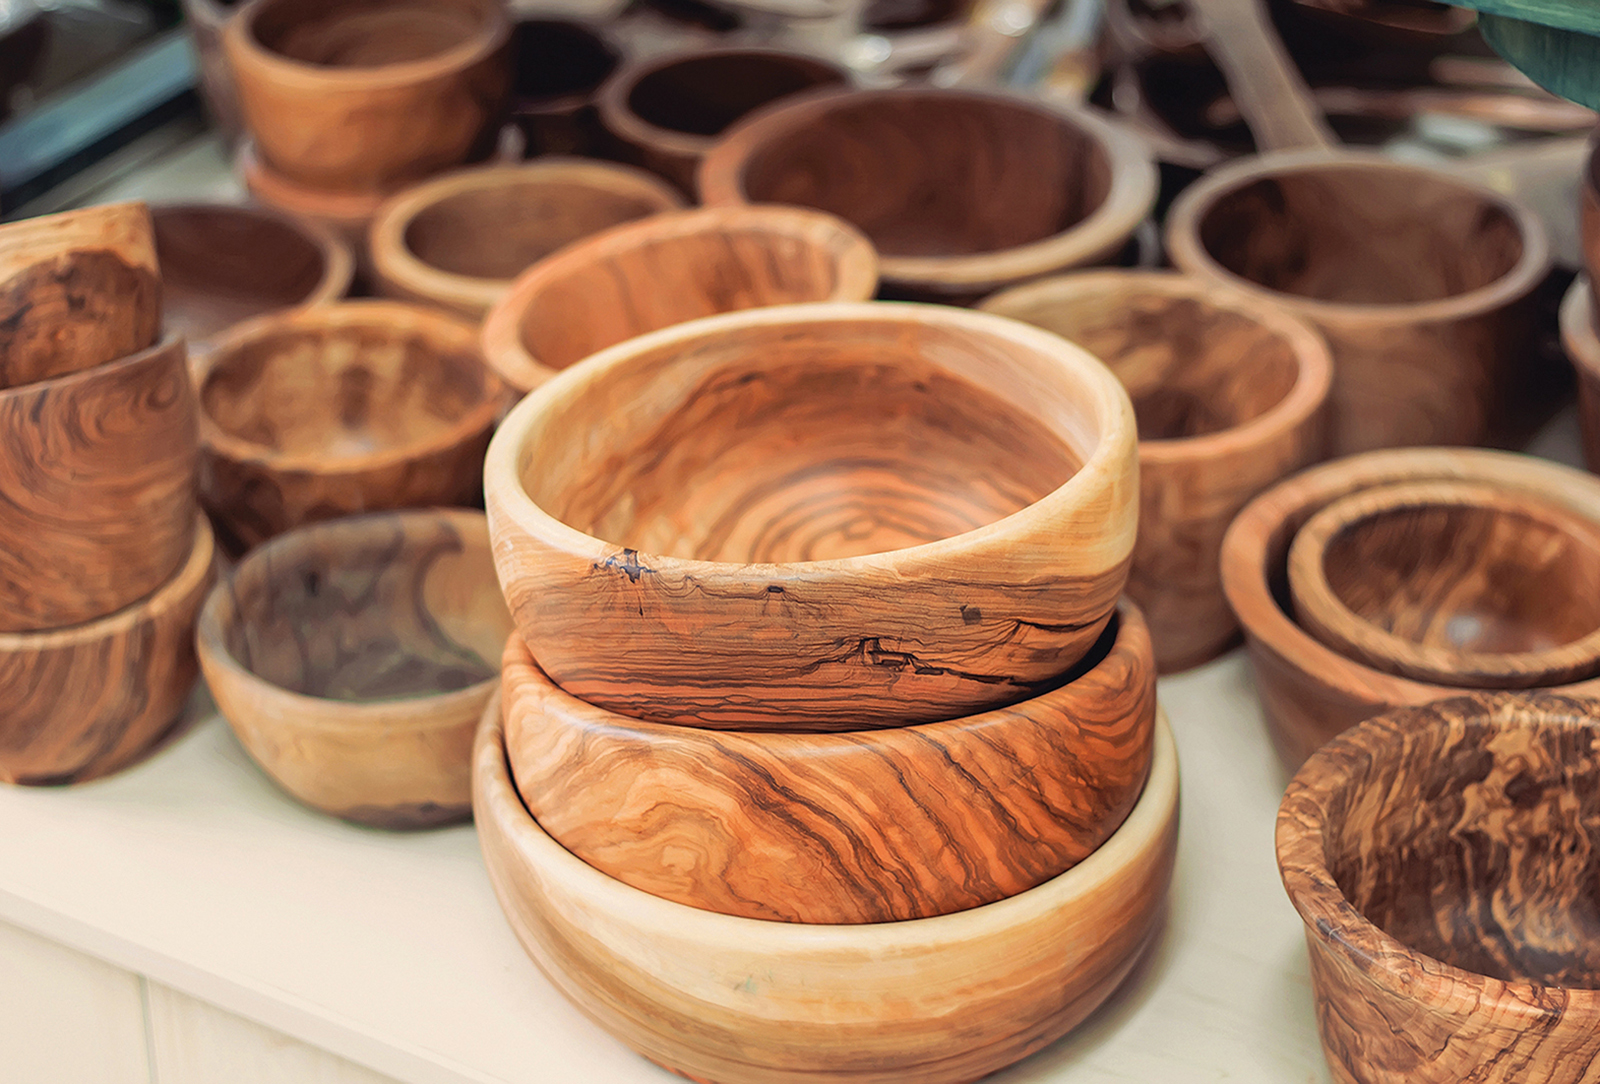 cashiers-nc-arts-crafts-show-wood-turned-bowls